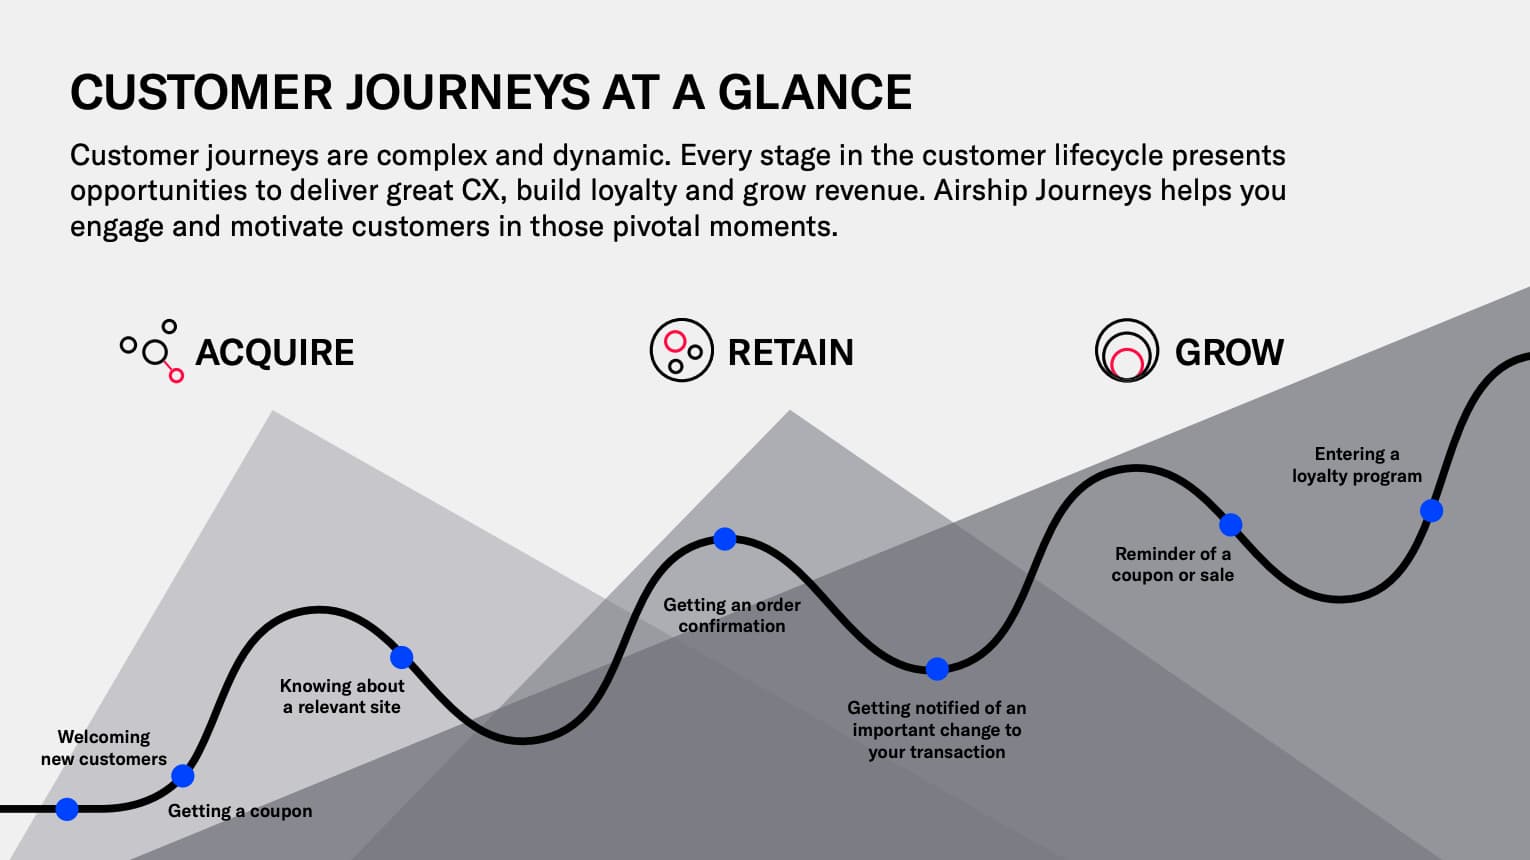 delivering-constantly-new-and-innovative-services-is-an-effective-way-to-improve-customer-life-cycle